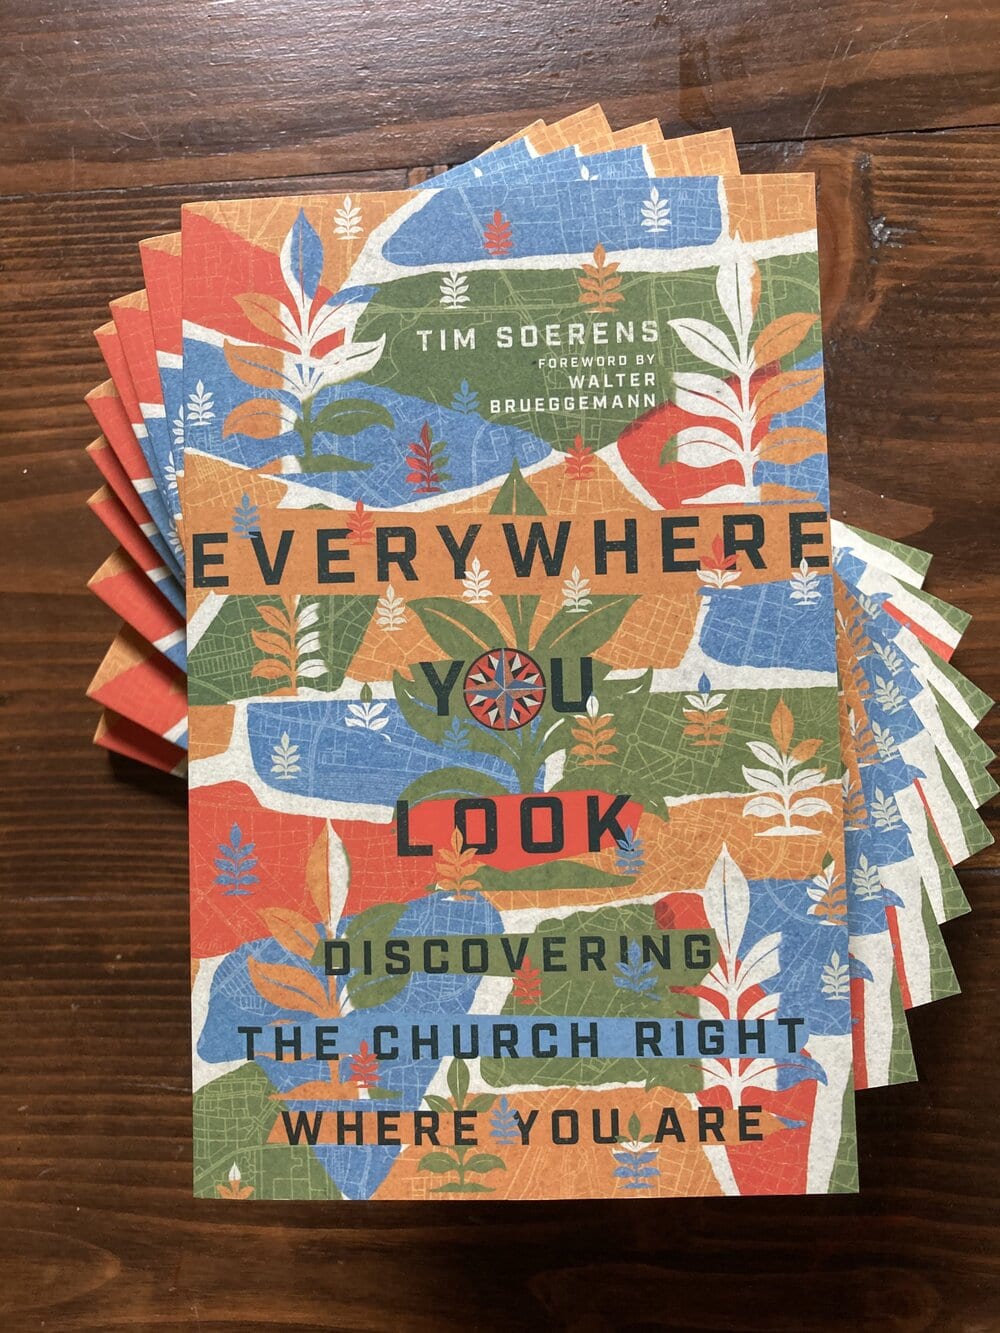 Everywhere You Look: Discovering the Church Right Where You Are